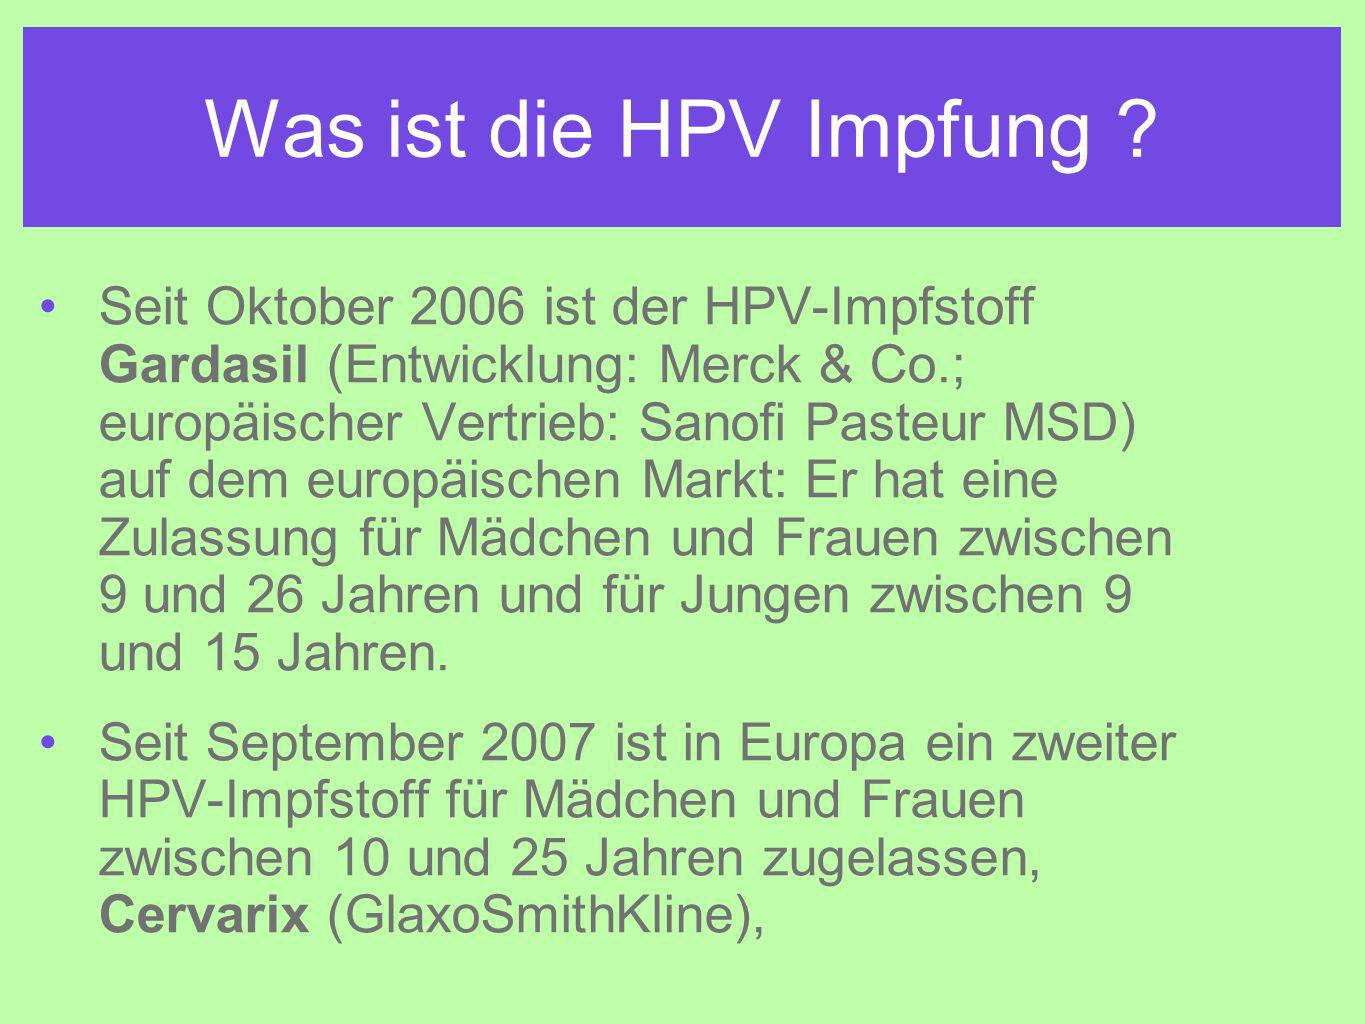 Hpv impfung reaktion